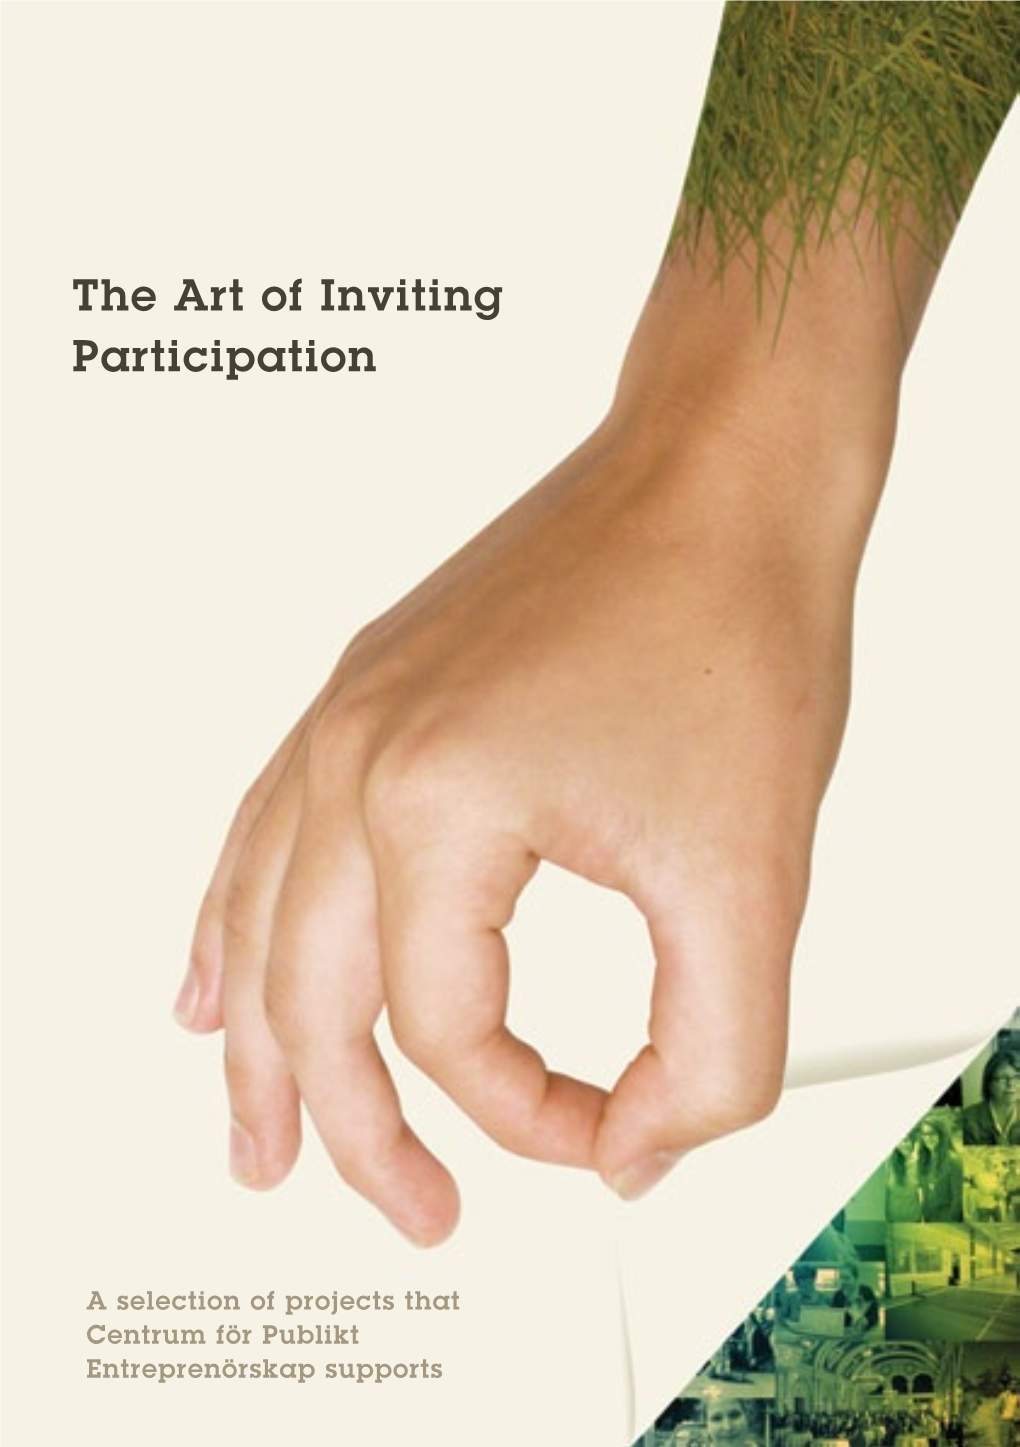 The Art of Inviting Participation